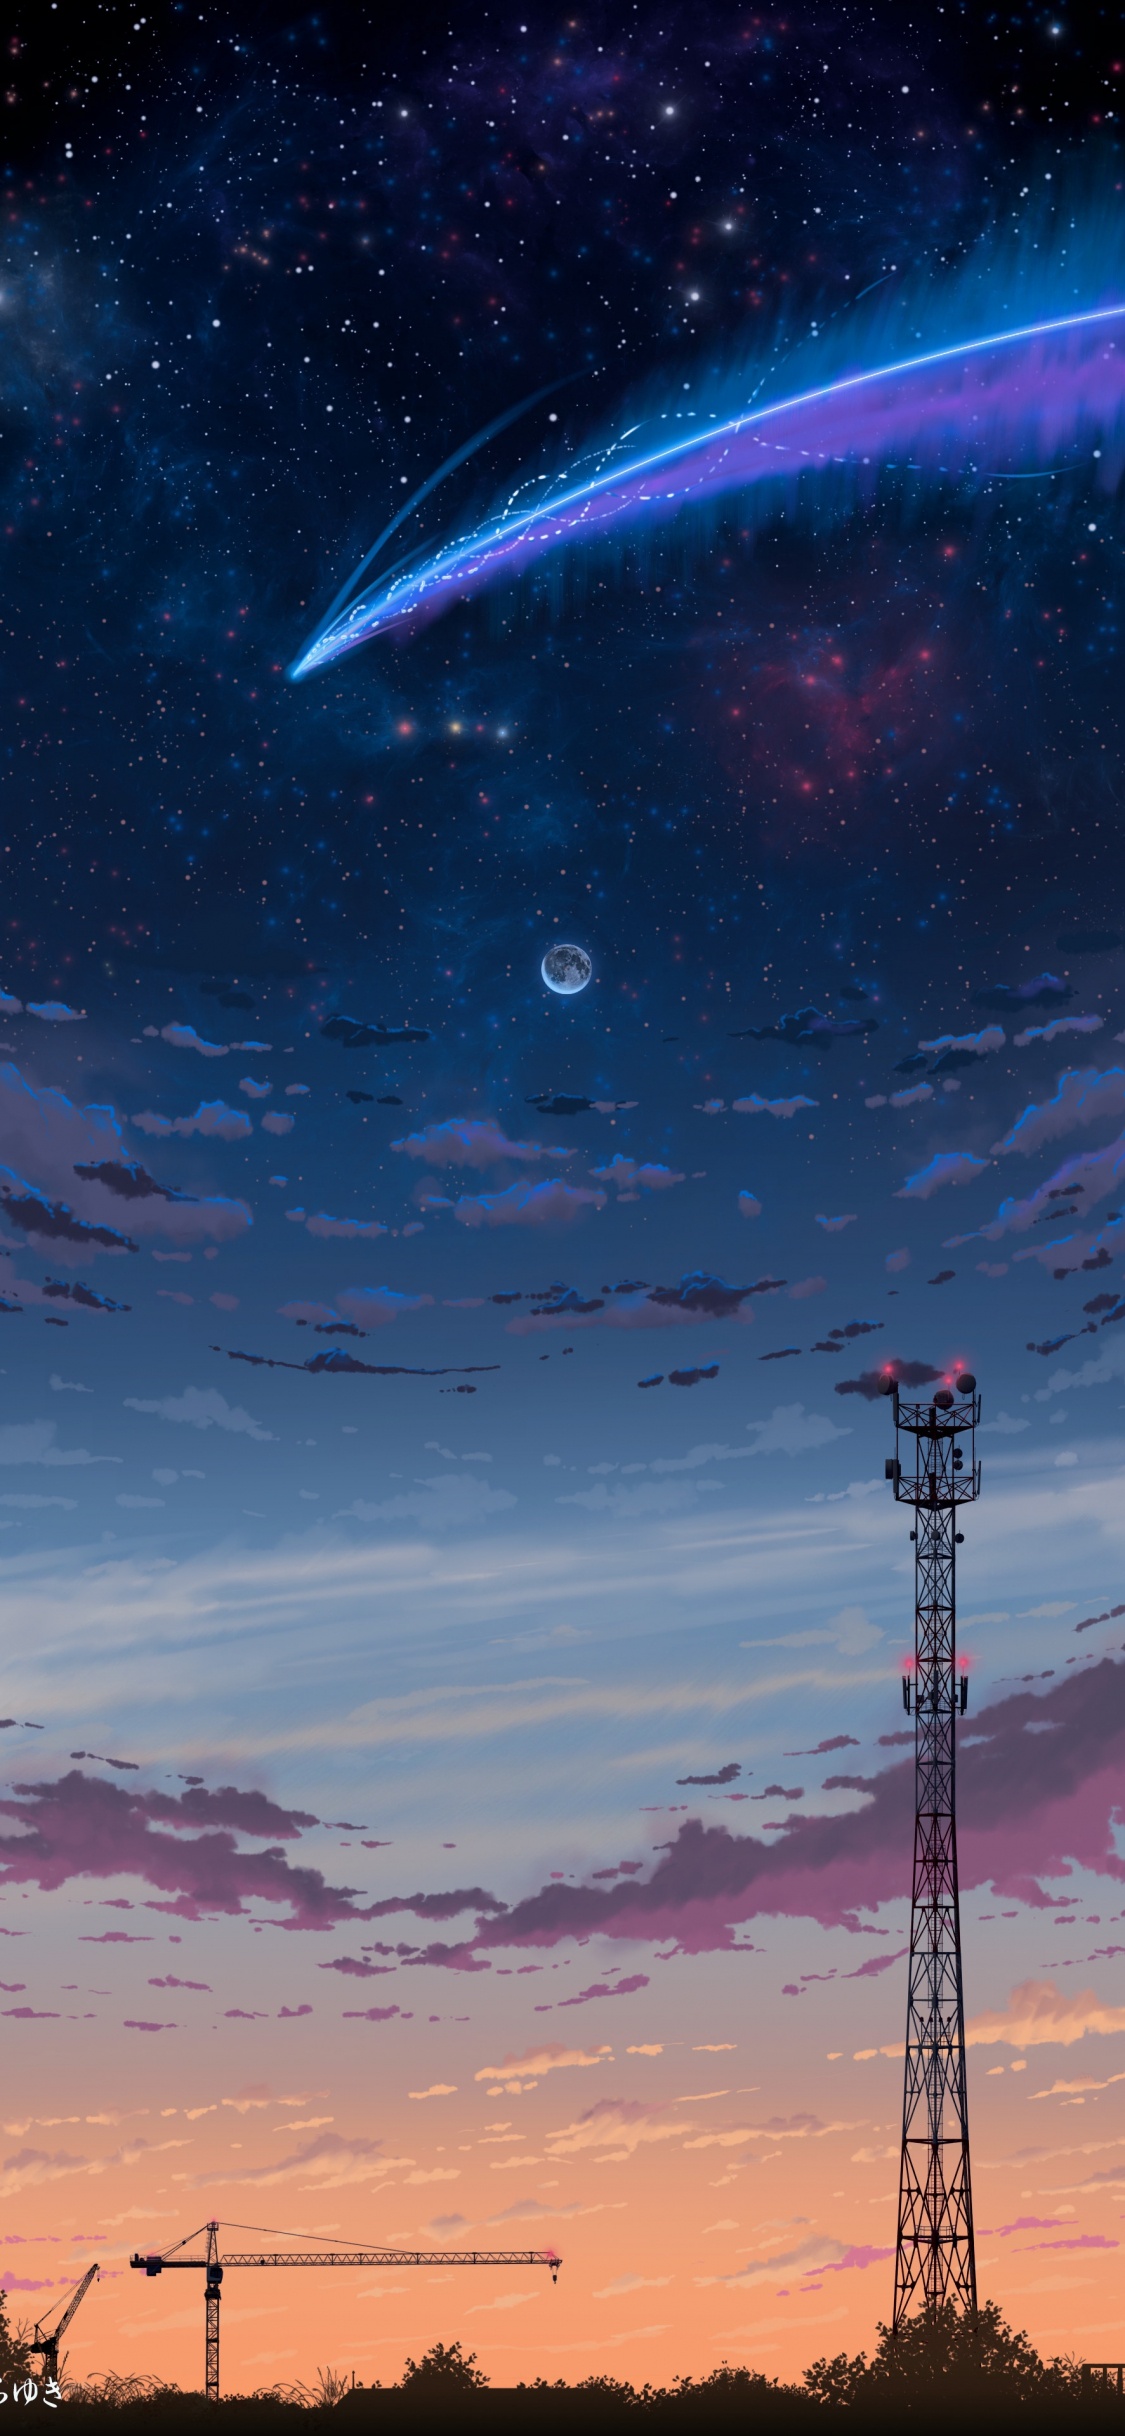 Silhouette of Tower Under Blue Sky With White Clouds During Night Time. Wallpaper in 1125x2436 Resolution